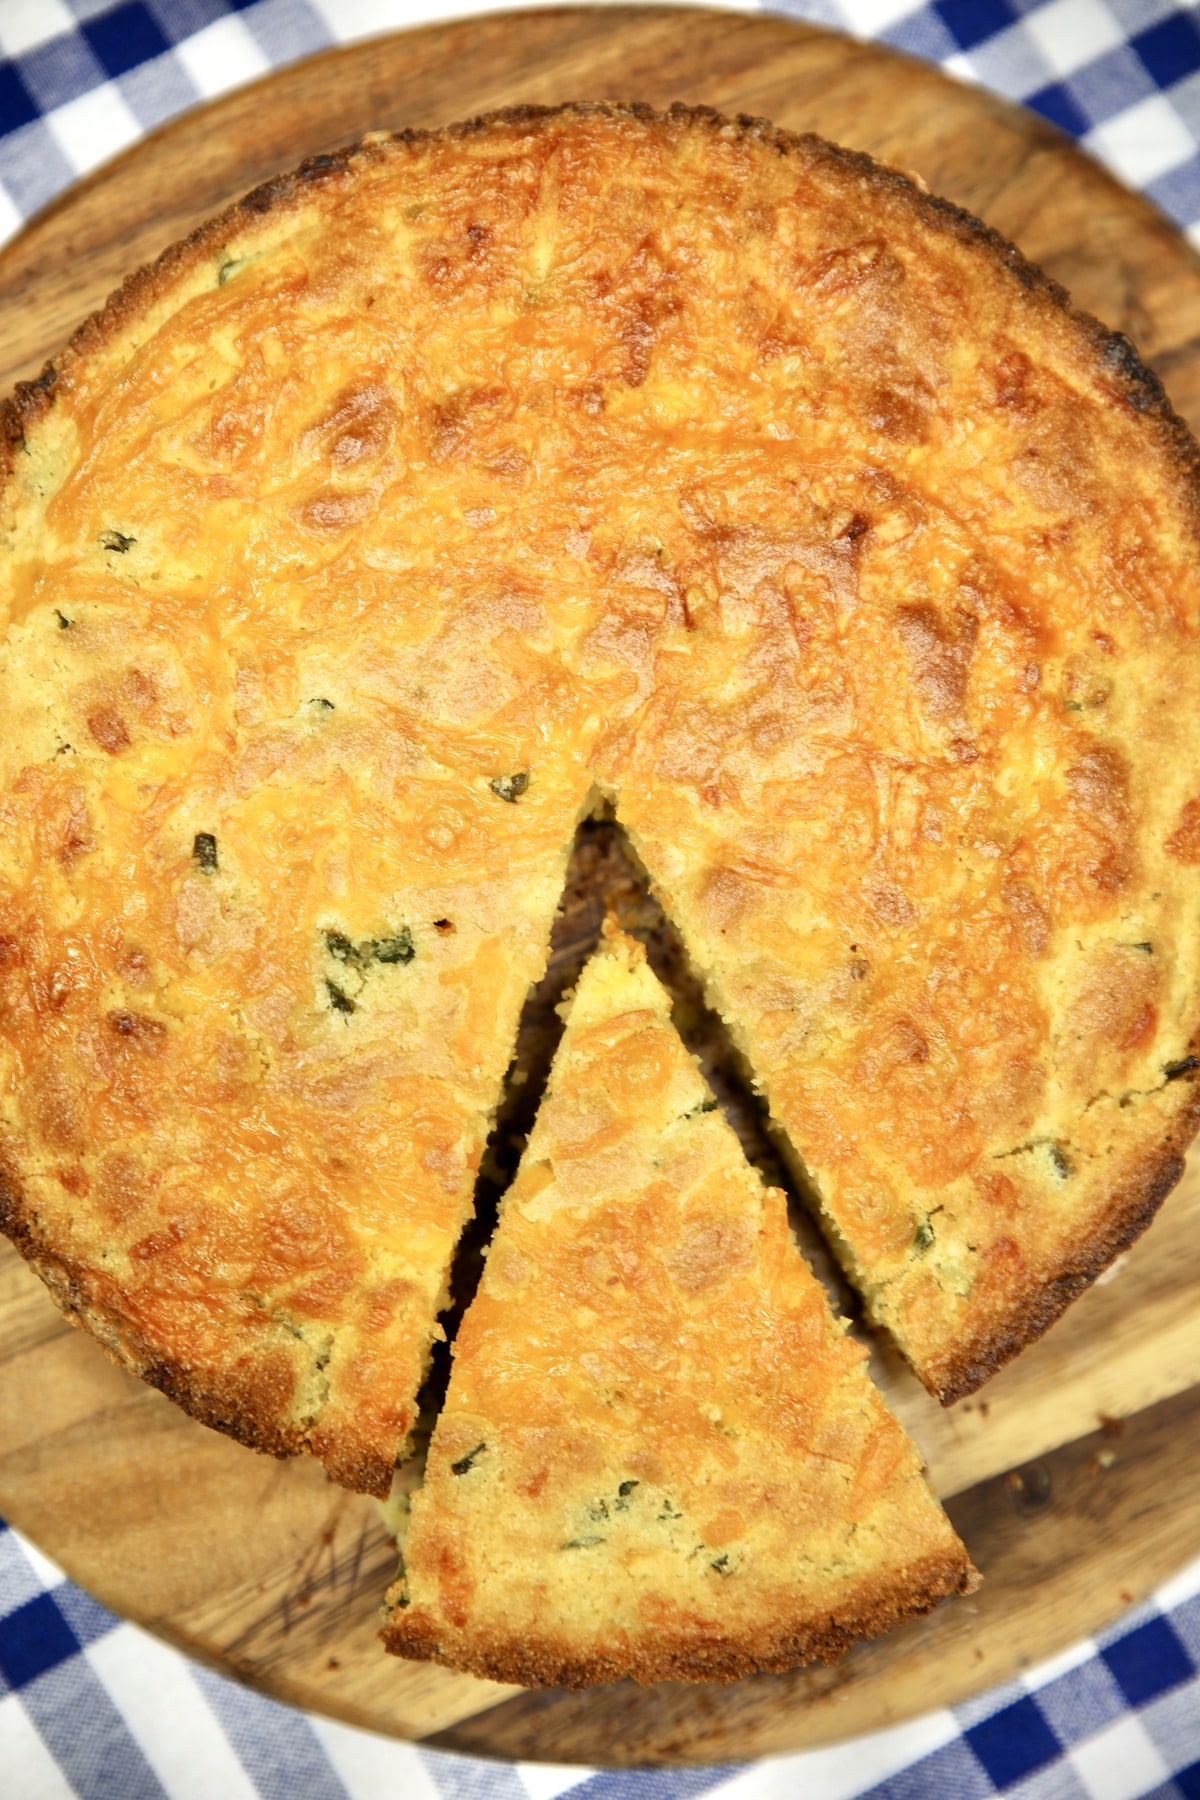 Overhead view of round jalapeno cheddar cornbread, one wedge sliced.